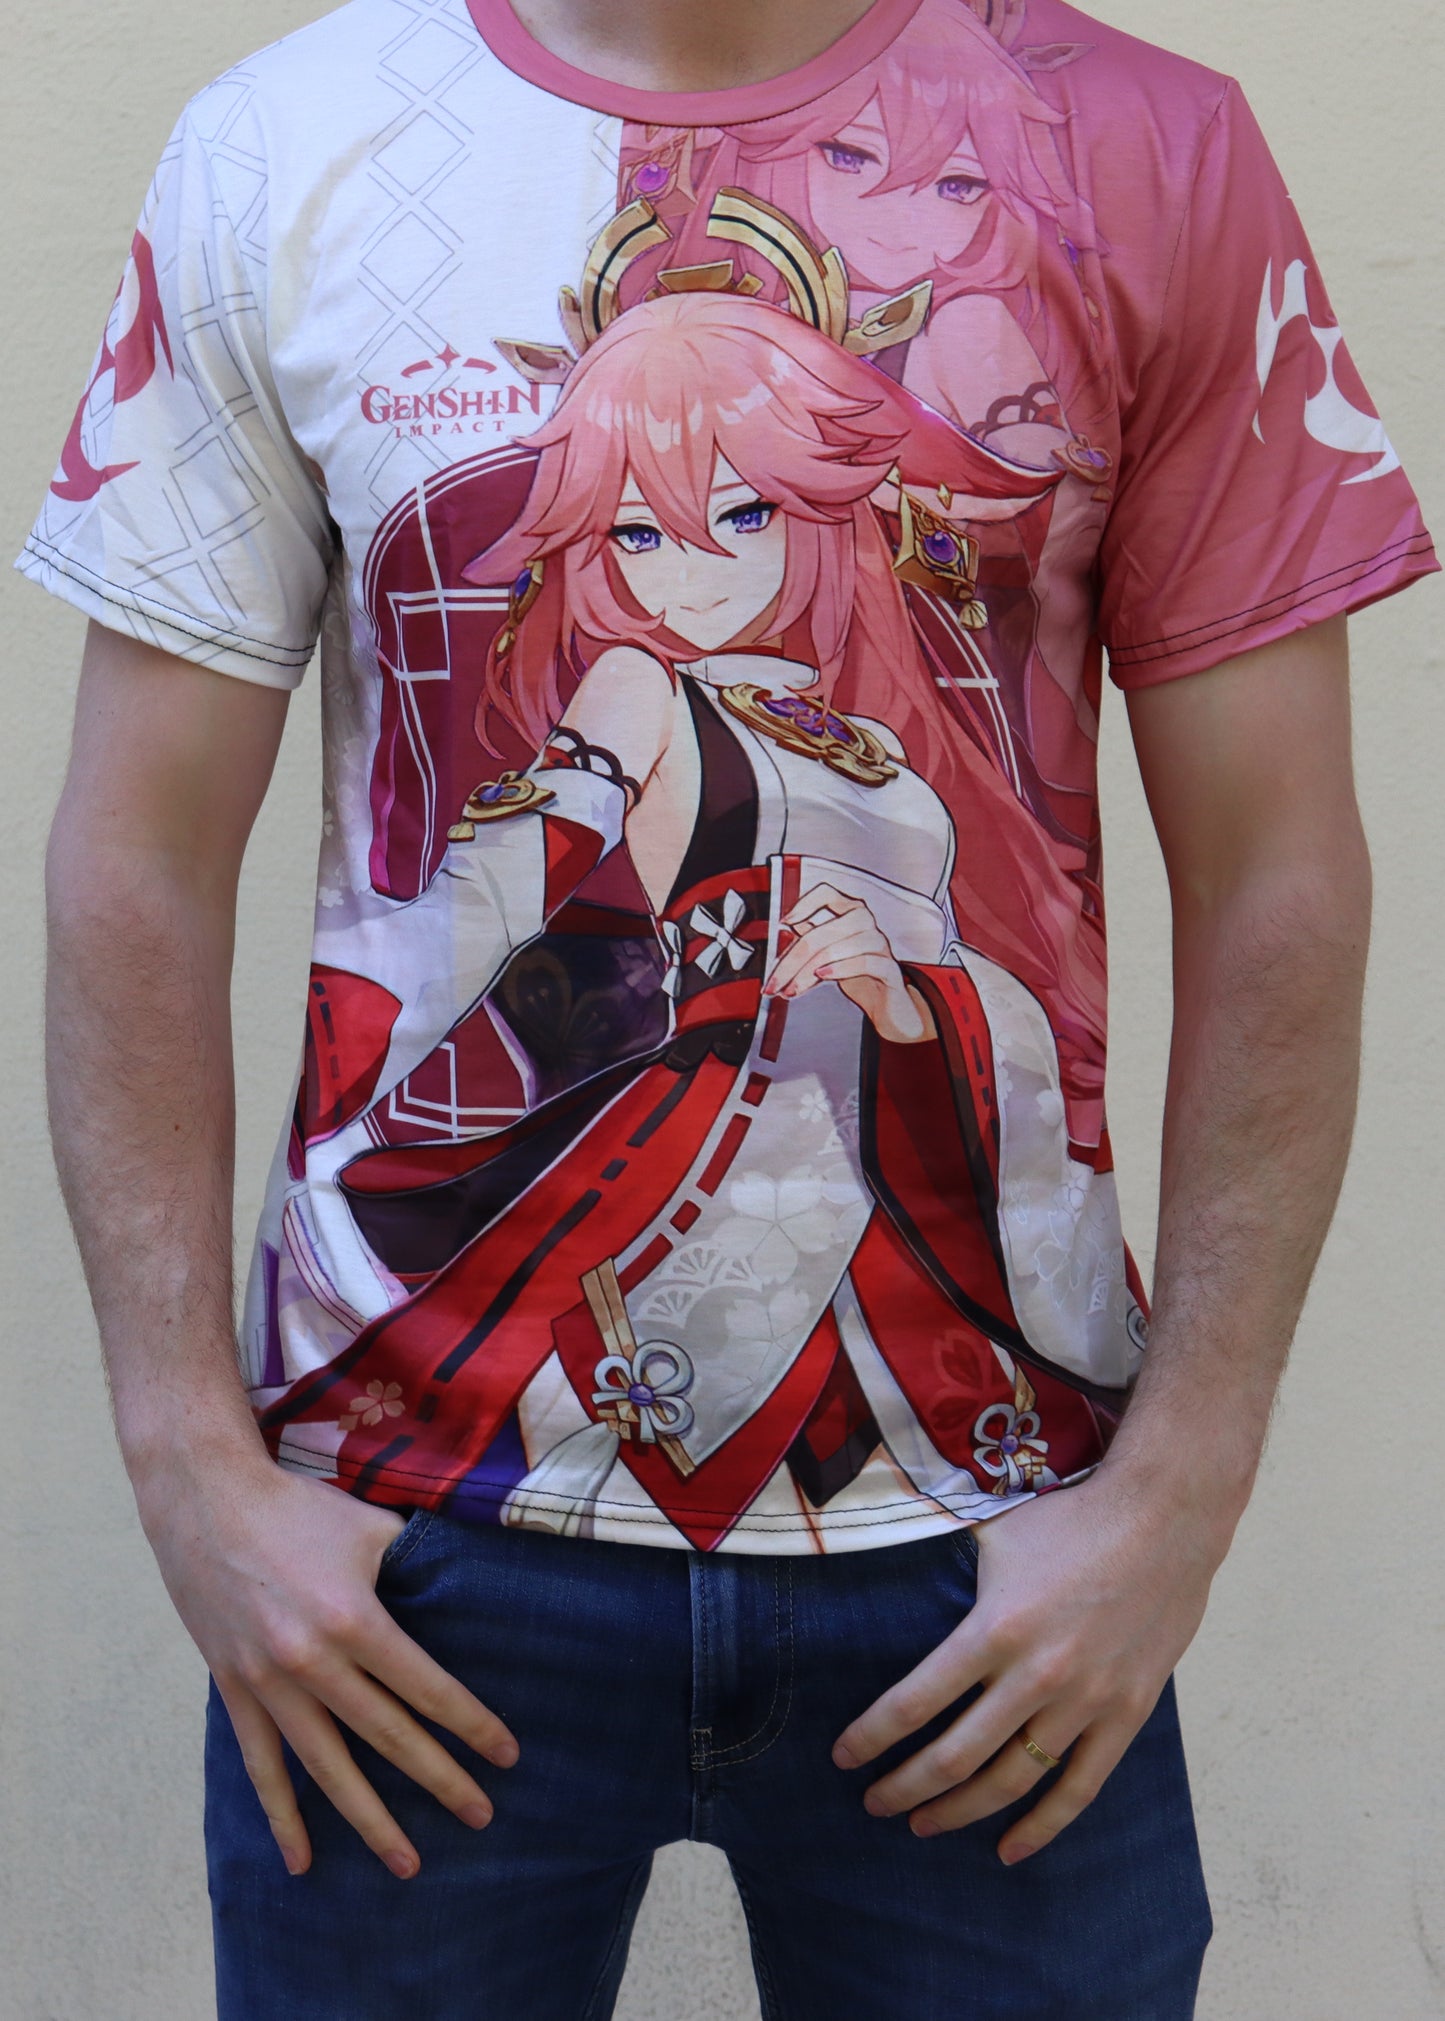 Yae Miko T-Shirt(Price Does Not Include Shipping)